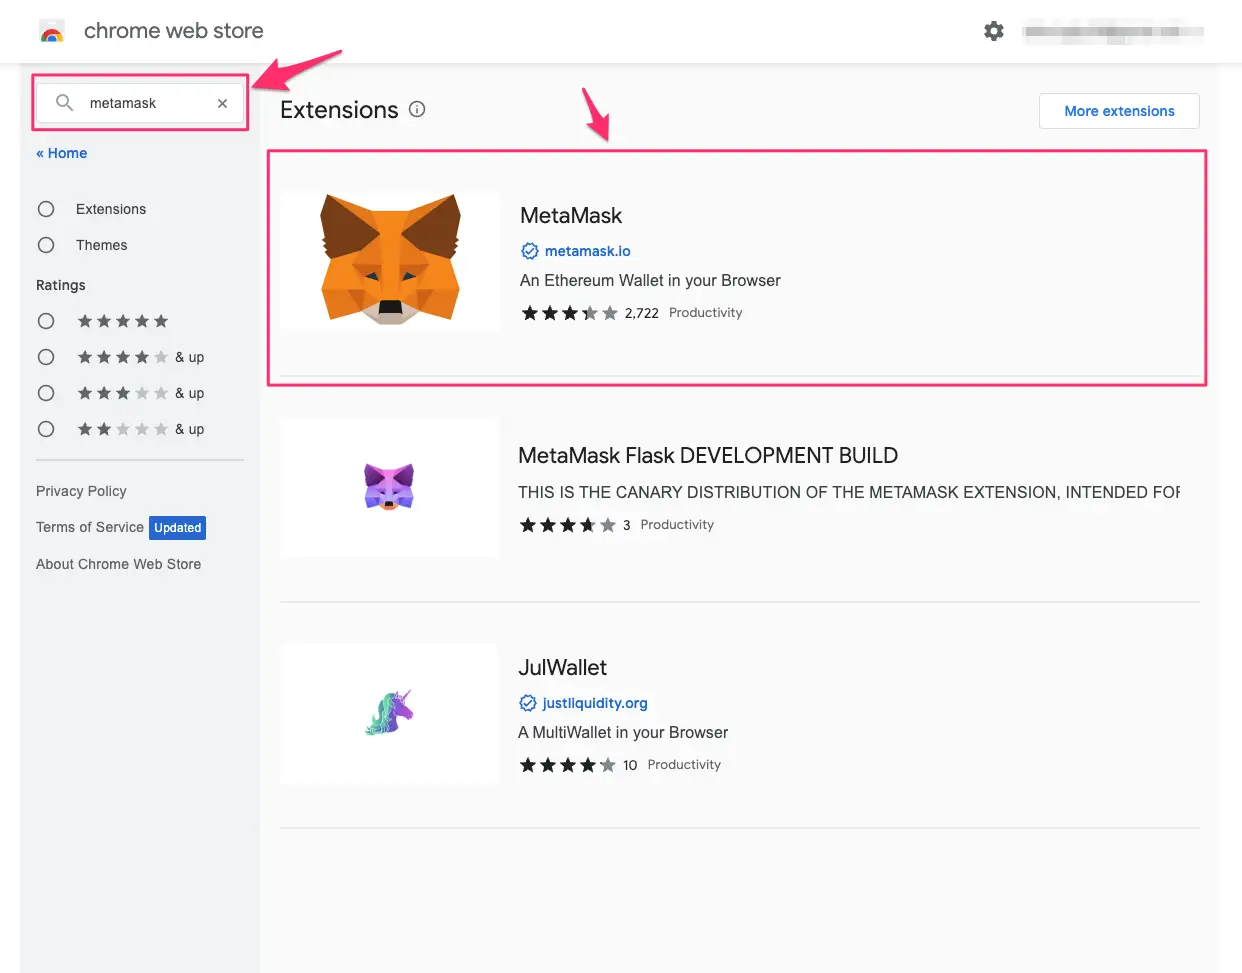 Configuring the Metamask Extension